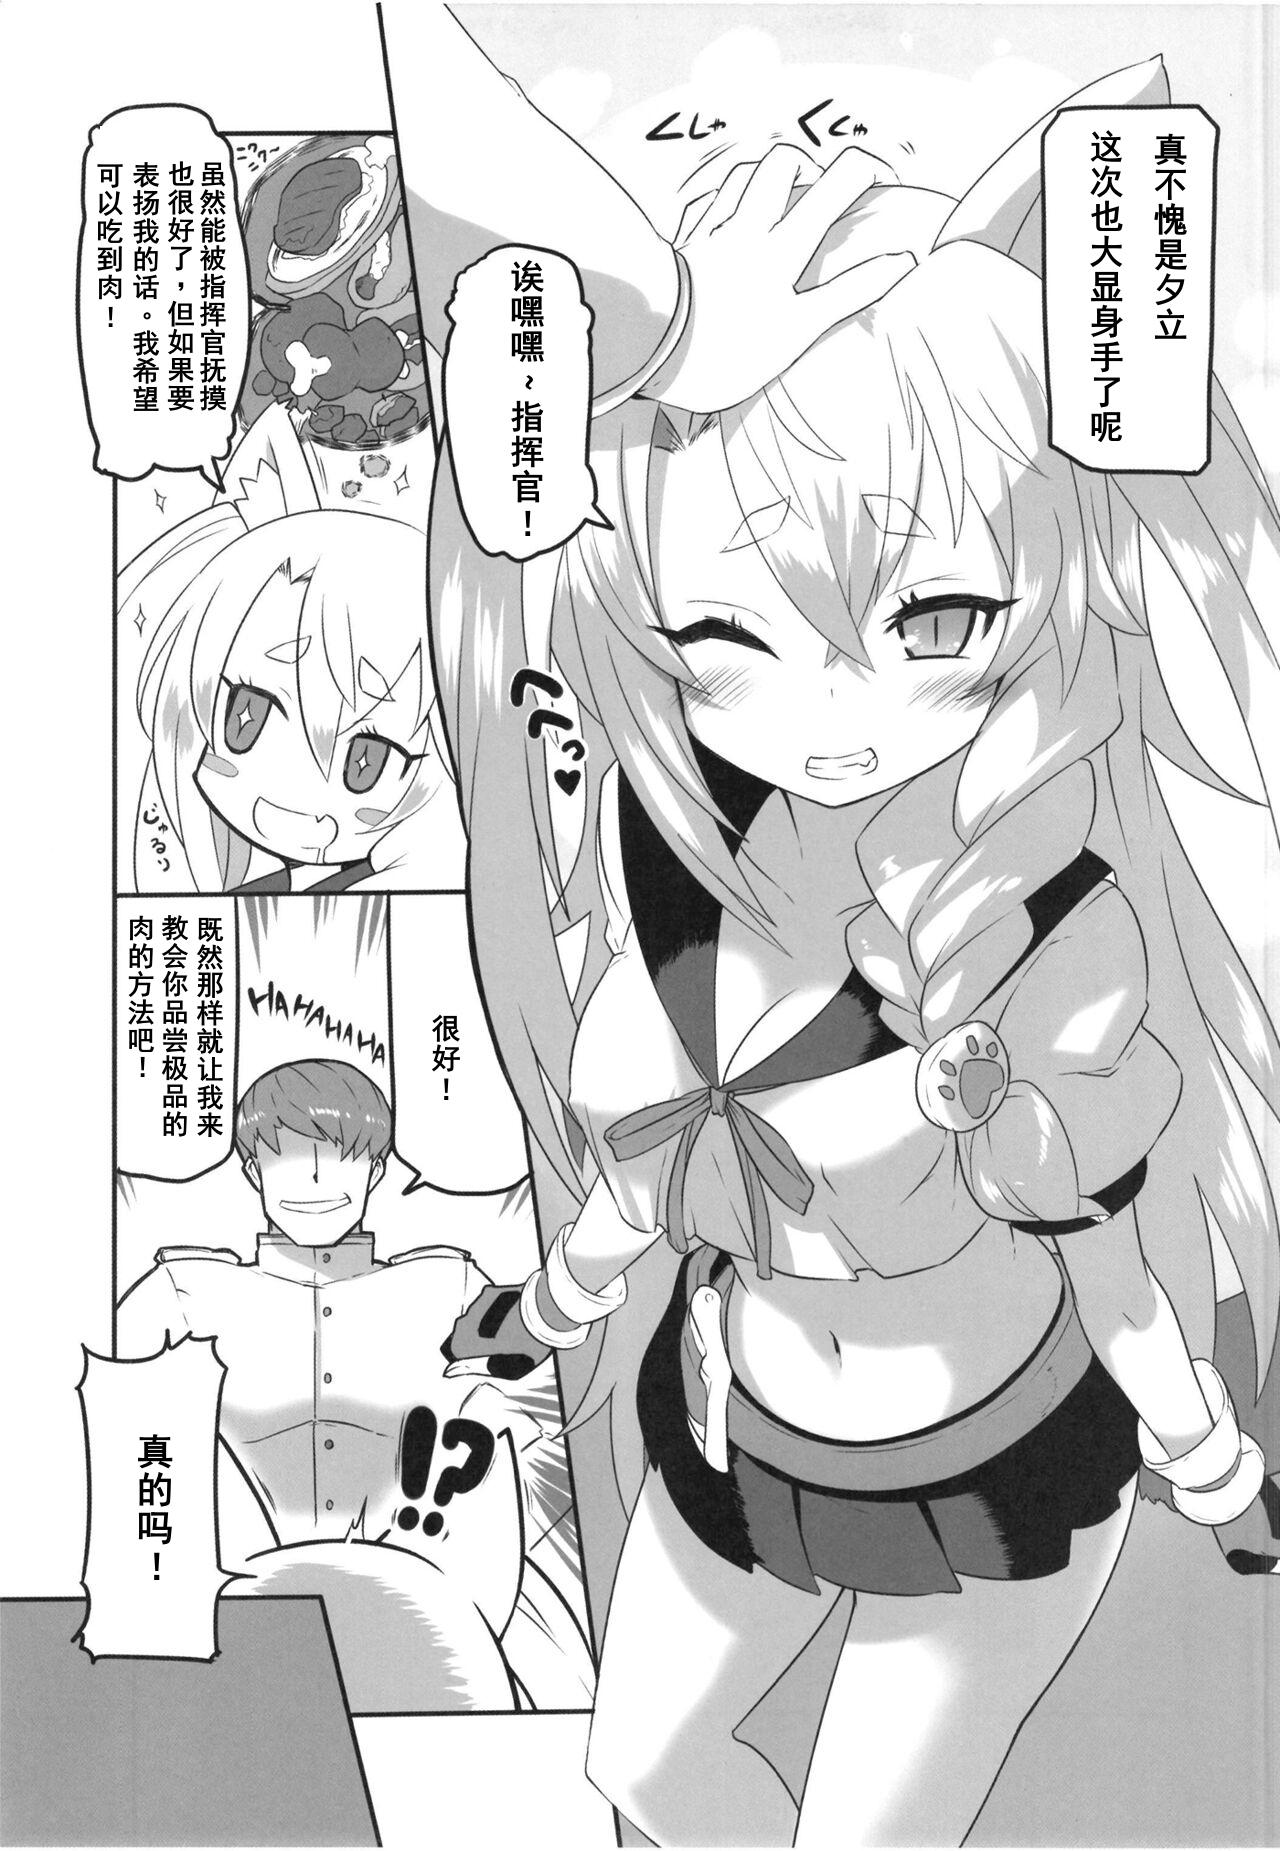 Creampie Yuudachi to Oishii Oniku - Yudachi and delicious meat - Azur lane Gay Blondhair - Page 4